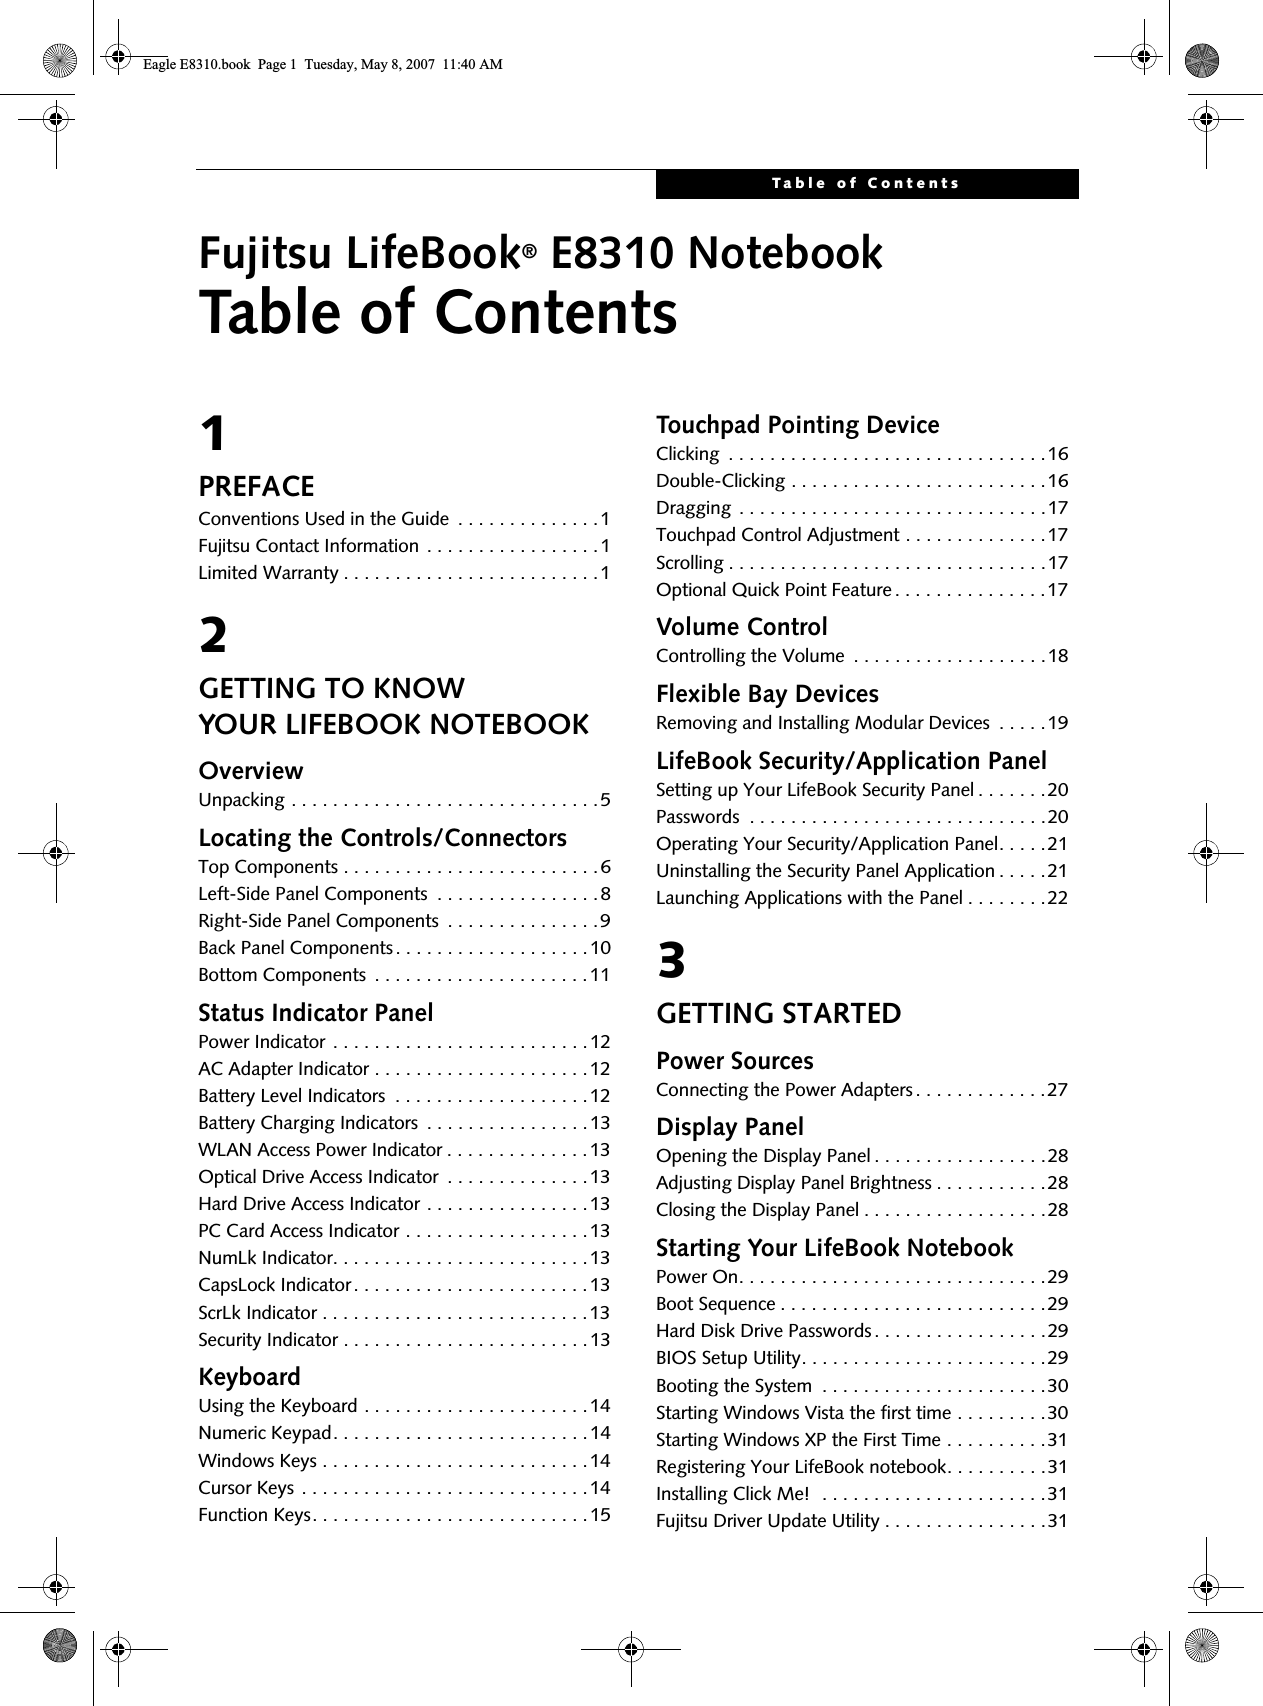 Table of ContentsFujitsu LifeBook® E8310 NotebookTable of Contents1PREFACEConventions Used in the Guide  . . . . . . . . . . . . . .1Fujitsu Contact Information . . . . . . . . . . . . . . . . .1Limited Warranty . . . . . . . . . . . . . . . . . . . . . . . . .12GETTING TO KNOWYOUR LIFEBOOK NOTEBOOKOverviewUnpacking . . . . . . . . . . . . . . . . . . . . . . . . . . . . . .5Locating the Controls/ConnectorsTop Components . . . . . . . . . . . . . . . . . . . . . . . . .6Left-Side Panel Components  . . . . . . . . . . . . . . . .8Right-Side Panel Components  . . . . . . . . . . . . . . .9Back Panel Components. . . . . . . . . . . . . . . . . . .10Bottom Components  . . . . . . . . . . . . . . . . . . . . .11Status Indicator PanelPower Indicator . . . . . . . . . . . . . . . . . . . . . . . . .12AC Adapter Indicator . . . . . . . . . . . . . . . . . . . . .12Battery Level Indicators  . . . . . . . . . . . . . . . . . . .12Battery Charging Indicators  . . . . . . . . . . . . . . . .13WLAN Access Power Indicator . . . . . . . . . . . . . . 13Optical Drive Access Indicator  . . . . . . . . . . . . . .13Hard Drive Access Indicator . . . . . . . . . . . . . . . .13PC Card Access Indicator . . . . . . . . . . . . . . . . . .13NumLk Indicator. . . . . . . . . . . . . . . . . . . . . . . . .13CapsLock Indicator. . . . . . . . . . . . . . . . . . . . . . .13ScrLk Indicator . . . . . . . . . . . . . . . . . . . . . . . . . .13Security Indicator . . . . . . . . . . . . . . . . . . . . . . . .13KeyboardUsing the Keyboard . . . . . . . . . . . . . . . . . . . . . .14Numeric Keypad. . . . . . . . . . . . . . . . . . . . . . . . .14Windows Keys . . . . . . . . . . . . . . . . . . . . . . . . . .14Cursor Keys . . . . . . . . . . . . . . . . . . . . . . . . . . . .14Function Keys. . . . . . . . . . . . . . . . . . . . . . . . . . .15Touchpad Pointing DeviceClicking  . . . . . . . . . . . . . . . . . . . . . . . . . . . . . . .16Double-Clicking . . . . . . . . . . . . . . . . . . . . . . . . .16Dragging  . . . . . . . . . . . . . . . . . . . . . . . . . . . . . .17Touchpad Control Adjustment . . . . . . . . . . . . . .17Scrolling . . . . . . . . . . . . . . . . . . . . . . . . . . . . . . .17Optional Quick Point Feature . . . . . . . . . . . . . . .17Volume ControlControlling the Volume  . . . . . . . . . . . . . . . . . . .18Flexible Bay DevicesRemoving and Installing Modular Devices  . . . . .19LifeBook Security/Application PanelSetting up Your LifeBook Security Panel . . . . . . .20Passwords  . . . . . . . . . . . . . . . . . . . . . . . . . . . . .20Operating Your Security/Application Panel. . . . .21Uninstalling the Security Panel Application . . . . .21Launching Applications with the Panel . . . . . . . .223GETTING STARTEDPower SourcesConnecting the Power Adapters . . . . . . . . . . . . .27Display PanelOpening the Display Panel . . . . . . . . . . . . . . . . .28Adjusting Display Panel Brightness . . . . . . . . . . .28Closing the Display Panel . . . . . . . . . . . . . . . . . .28Starting Your LifeBook NotebookPower On. . . . . . . . . . . . . . . . . . . . . . . . . . . . . .29Boot Sequence . . . . . . . . . . . . . . . . . . . . . . . . . .29Hard Disk Drive Passwords . . . . . . . . . . . . . . . . .29BIOS Setup Utility. . . . . . . . . . . . . . . . . . . . . . . .29Booting the System  . . . . . . . . . . . . . . . . . . . . . .30Starting Windows Vista the first time . . . . . . . . .30Starting Windows XP the First Time . . . . . . . . . .31Registering Your LifeBook notebook. . . . . . . . . .31Installing Click Me!  . . . . . . . . . . . . . . . . . . . . . .31Fujitsu Driver Update Utility . . . . . . . . . . . . . . . .31Eagle E8310.book  Page 1  Tuesday, May 8, 2007  11:40 AM